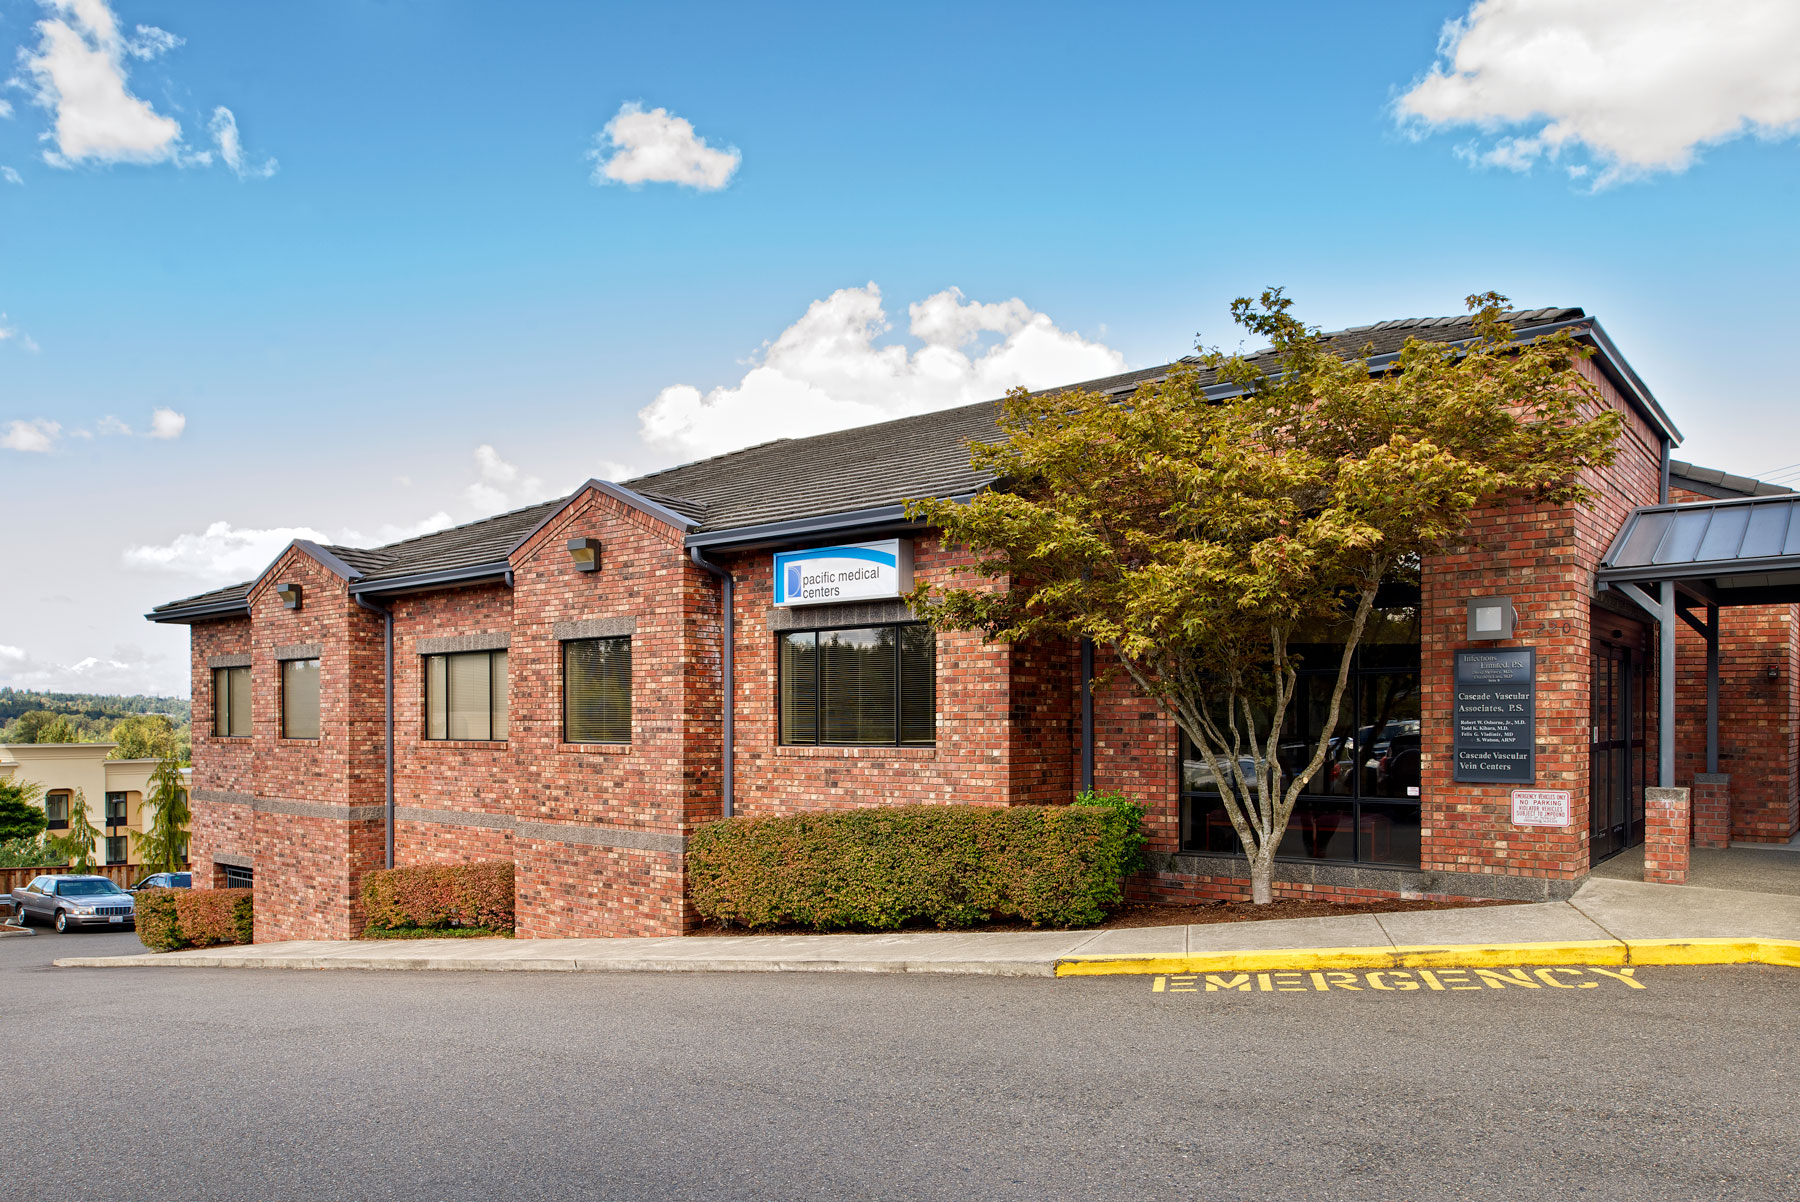 Pacific Medical Centers in Puyallup, Washington.